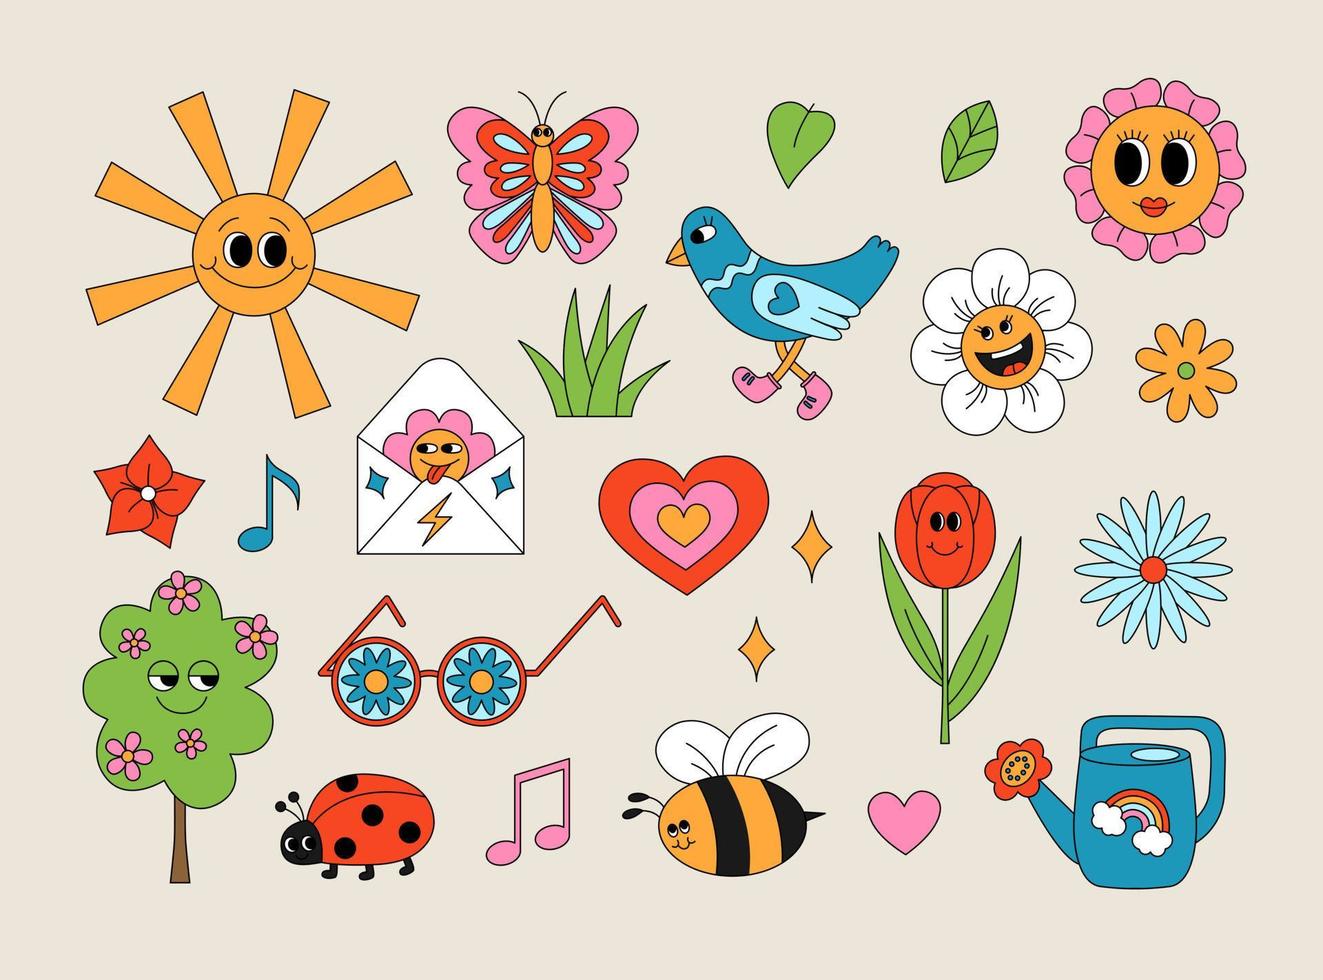 Retro 70s groovy spring and summer elements set. Funky hippie stickers with cartoon flowers, leaves, tree, grass, bird, insects, heart, sun, sunglasses, watering can etc. Isolated vector illustration